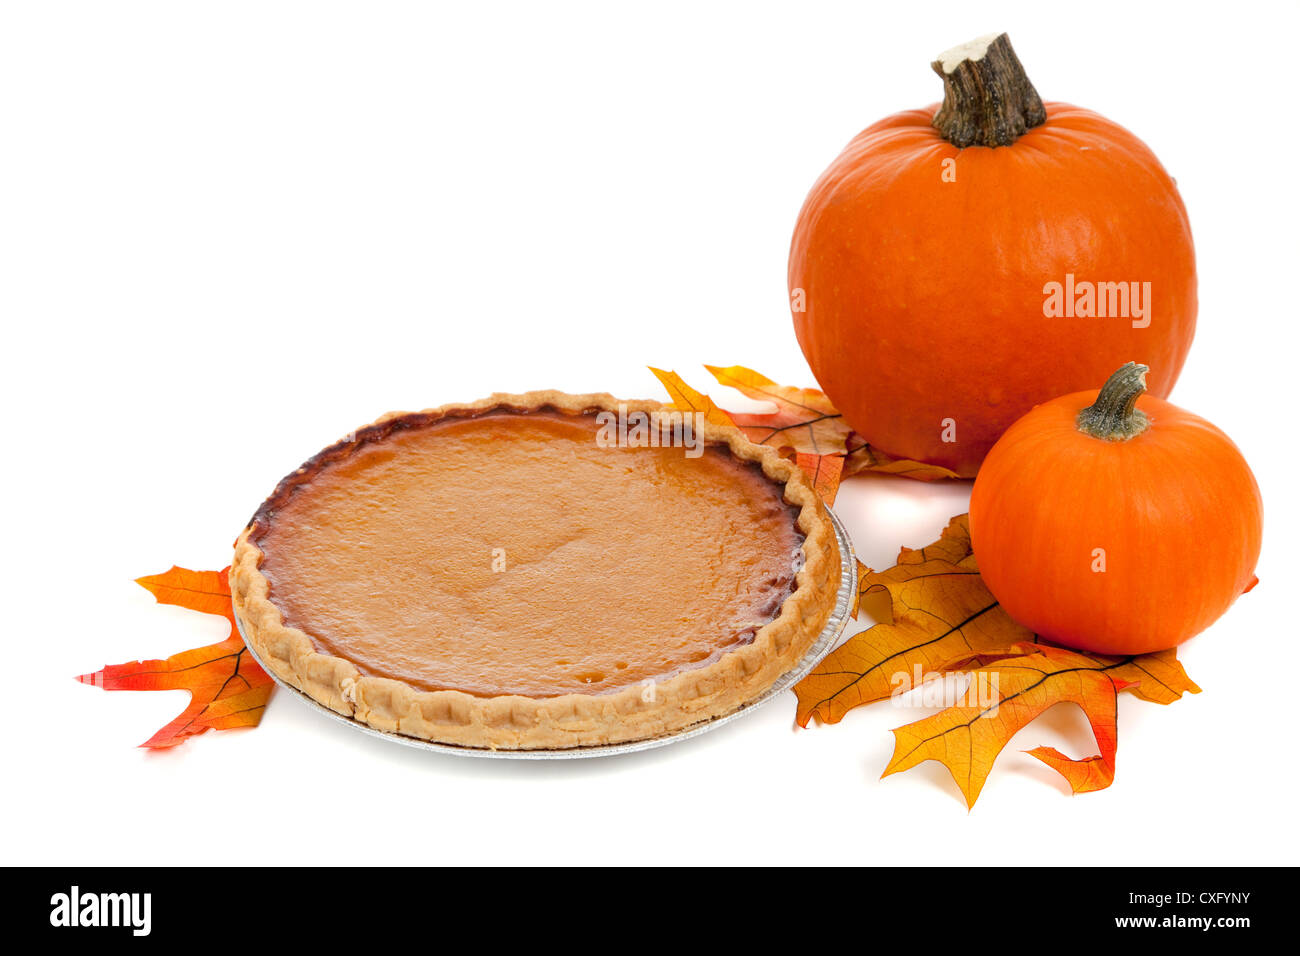 Pumpkin pie with leaves and pumpkins Stock Photo